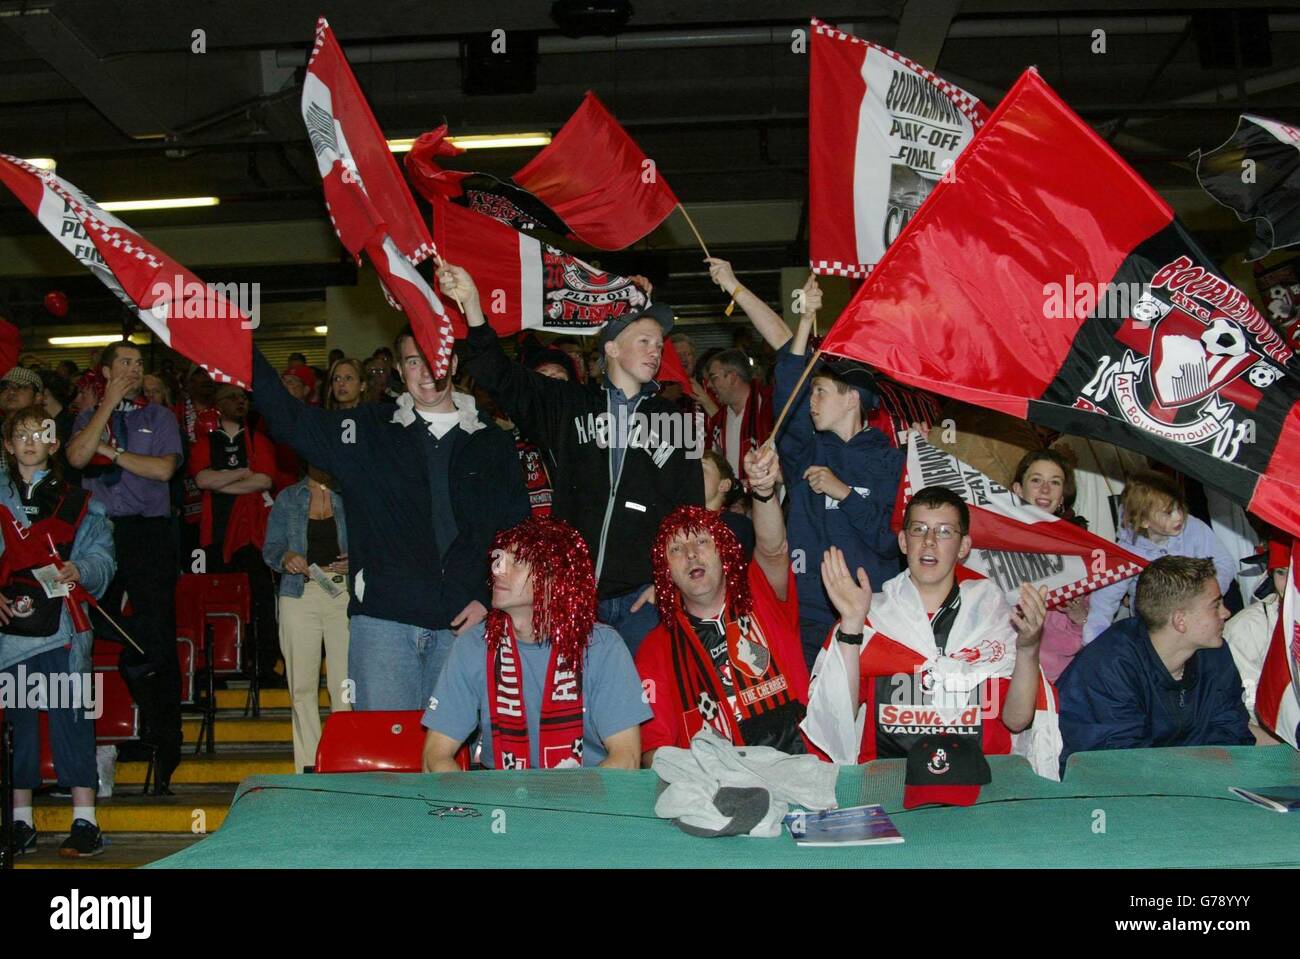 Bournemouth's fans wait for the start of their Nationwide Division 3 play-off final against Lincoln City at the Millennium Stadium in Cardiff. NO UNOFFICIAL CLUB WEBSITE USE. Stock Photo